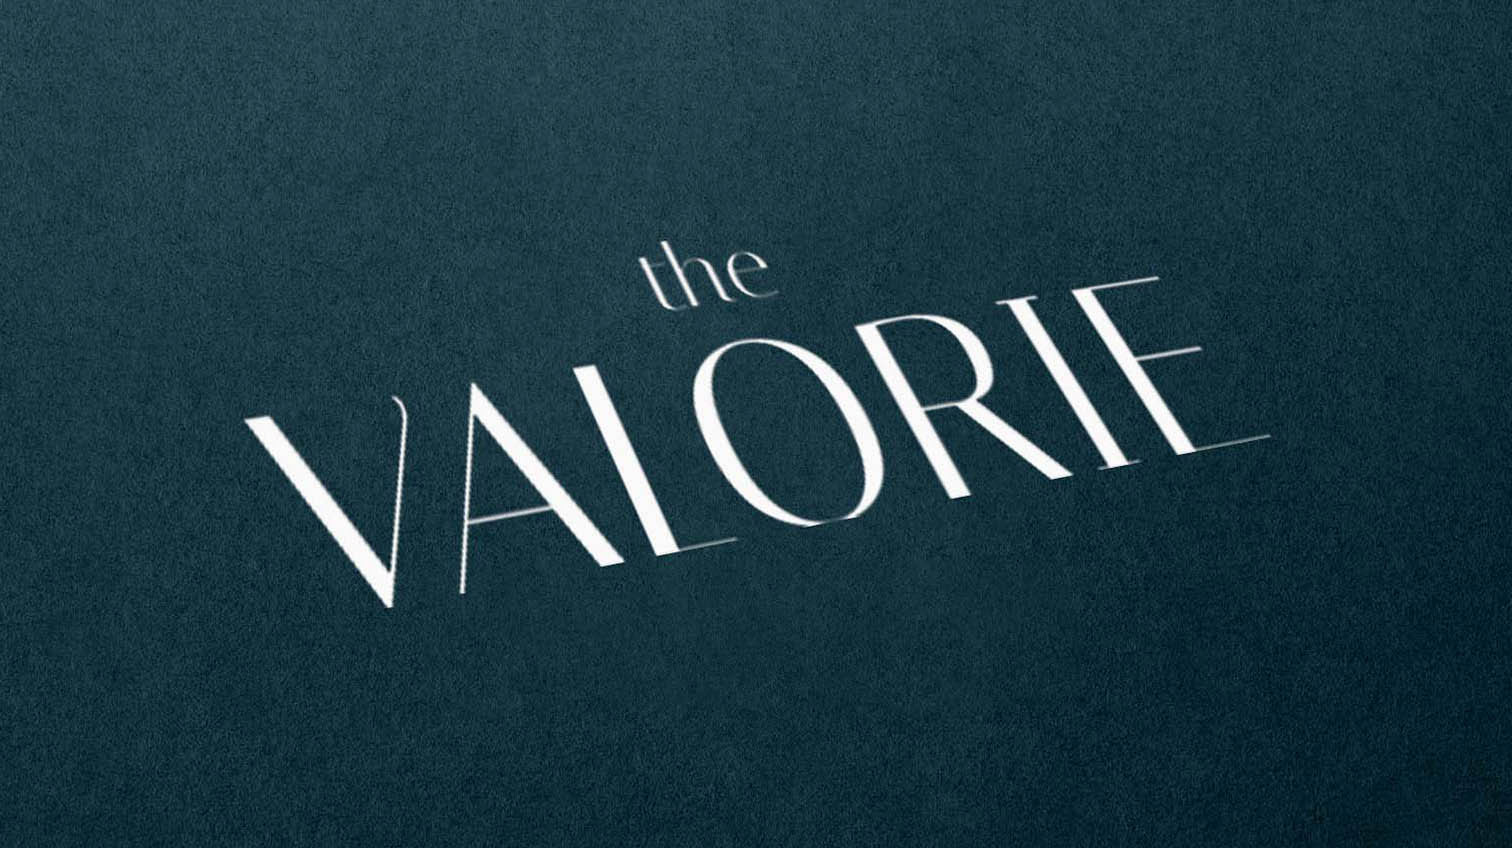 The Valorie logo in print – by White Canvas Design